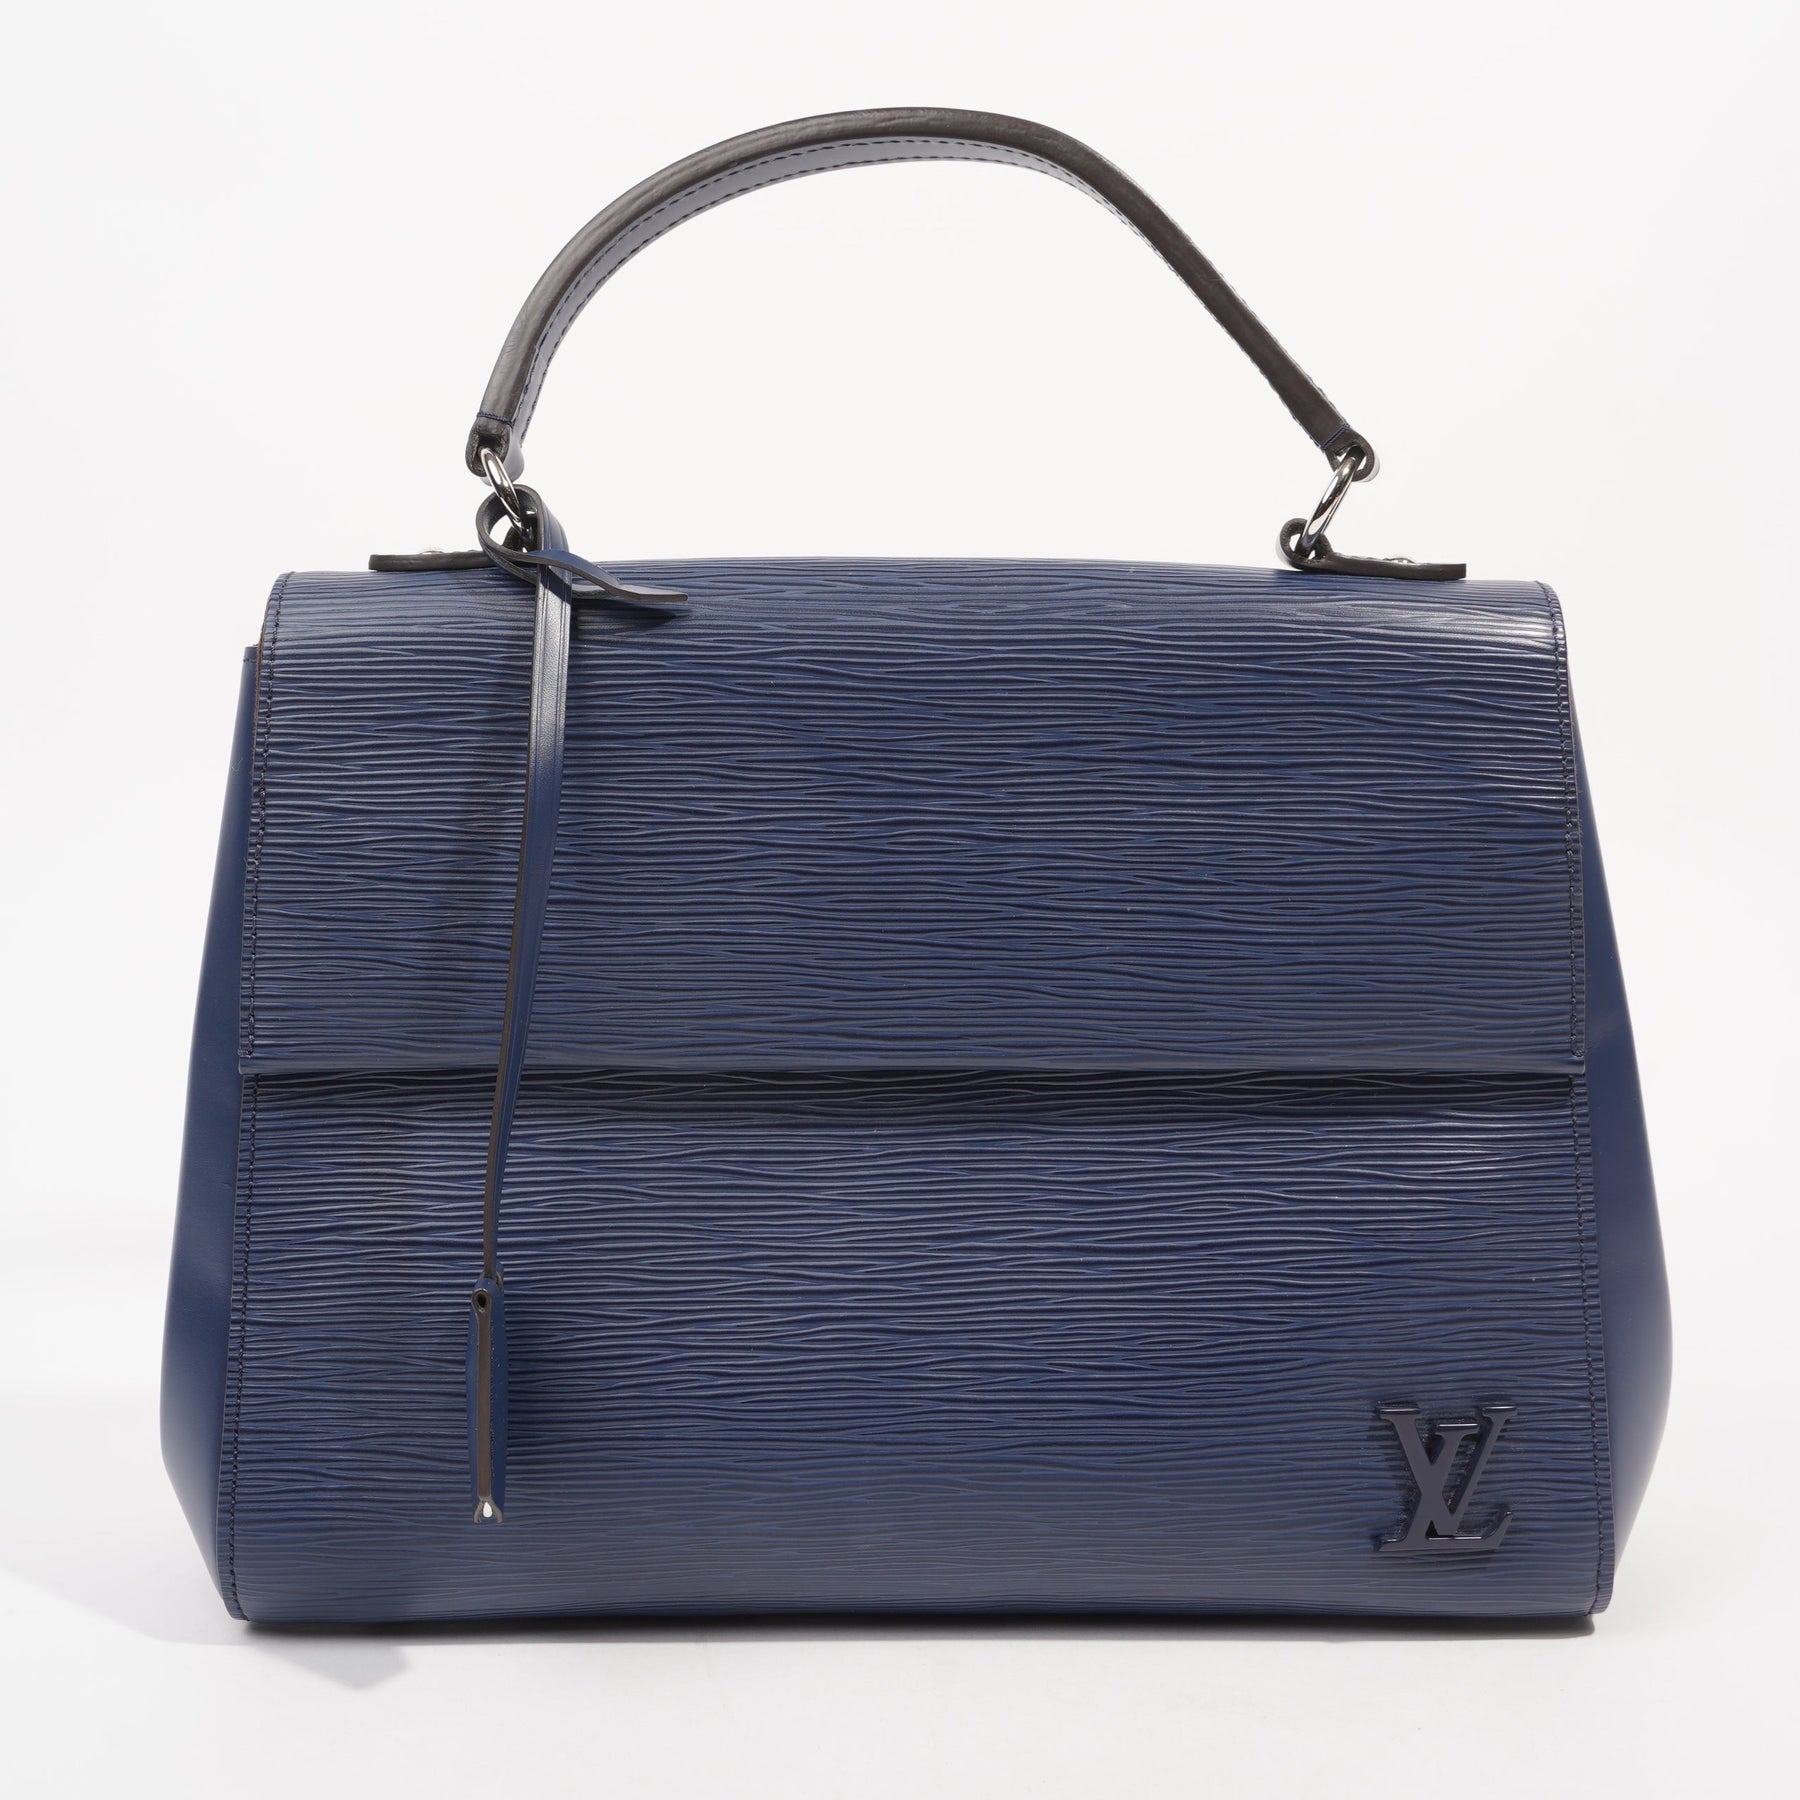 Louis Vuitton Cluny Leather Bag